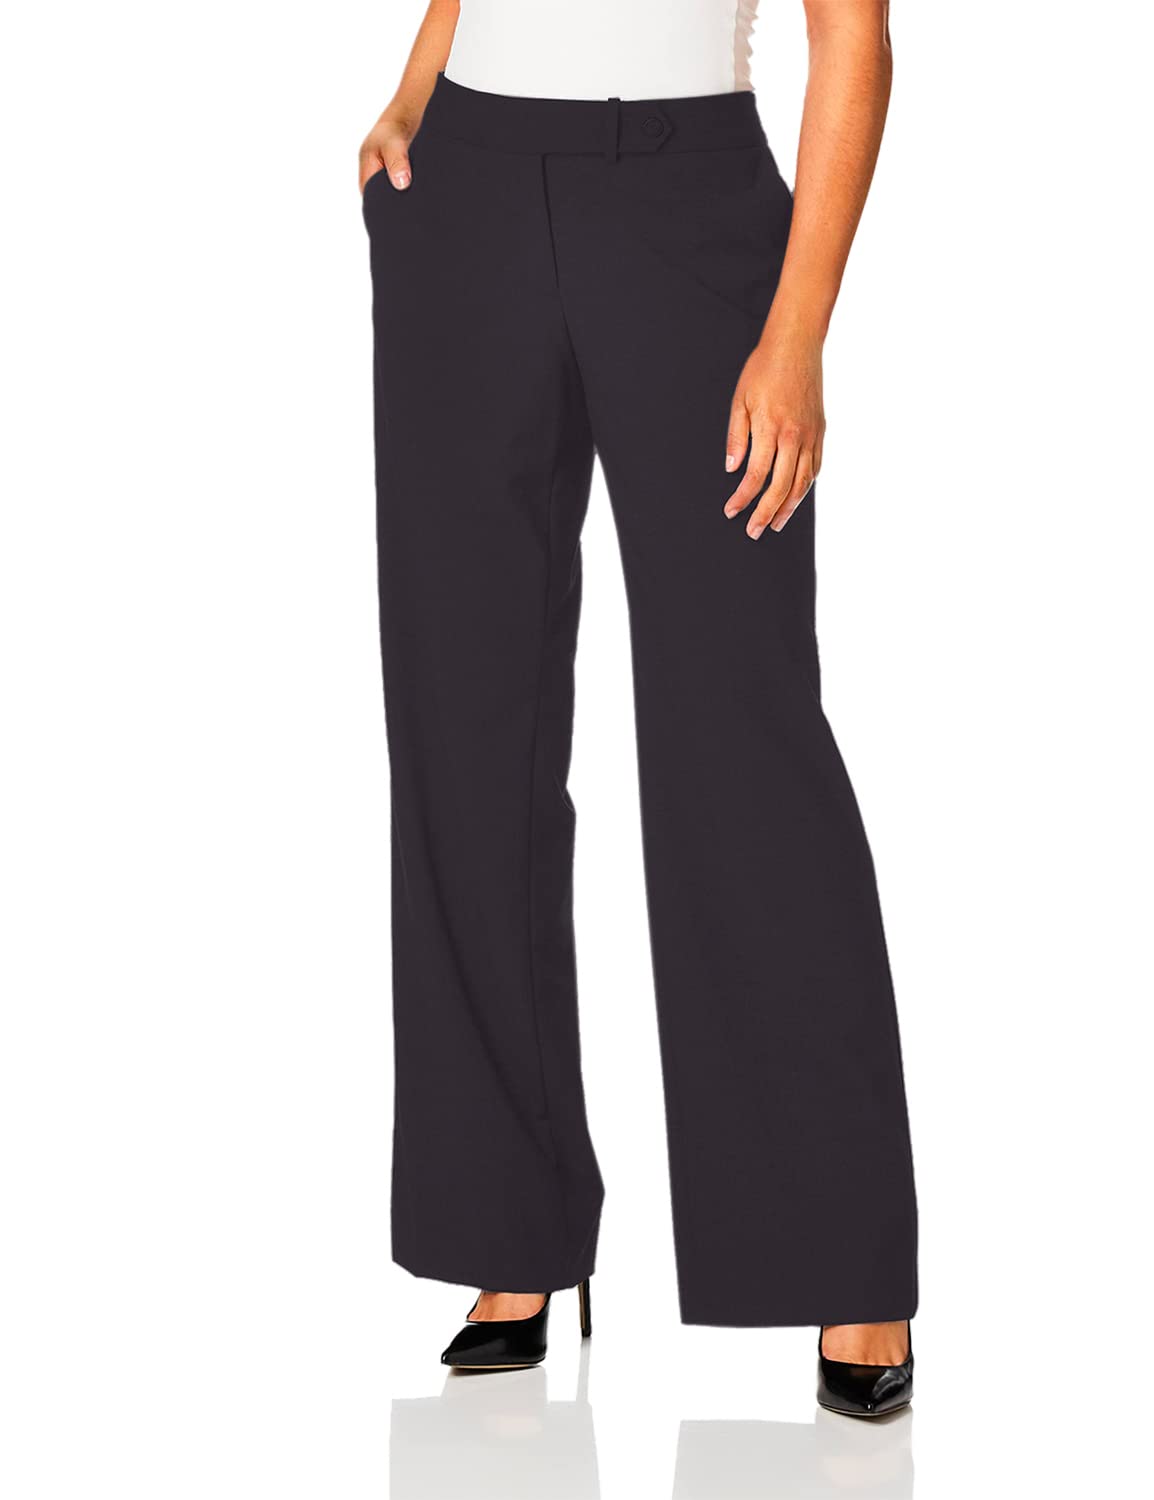 Calvin Klein Straight-Leg Classic Business Casual Pants for Women